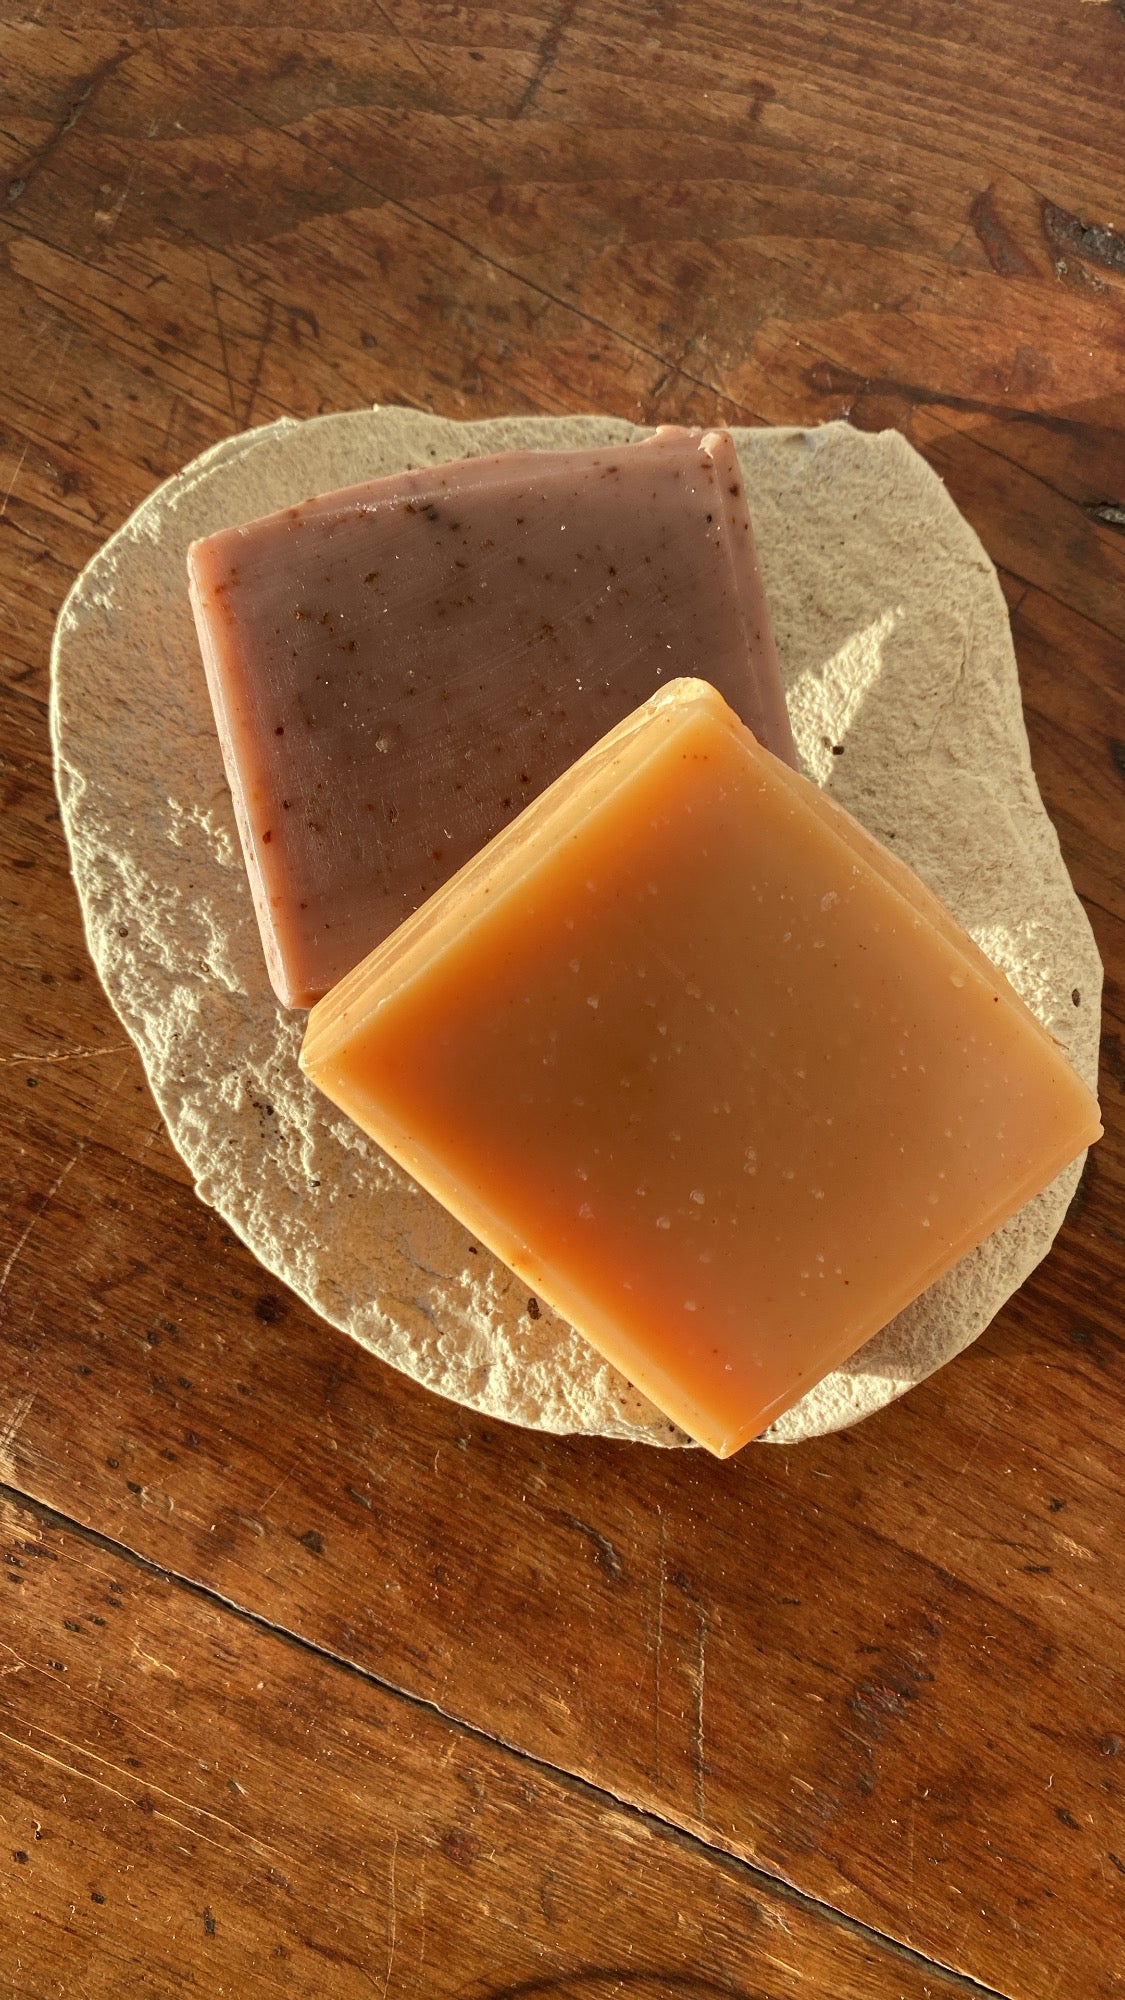 Tallow Soaps